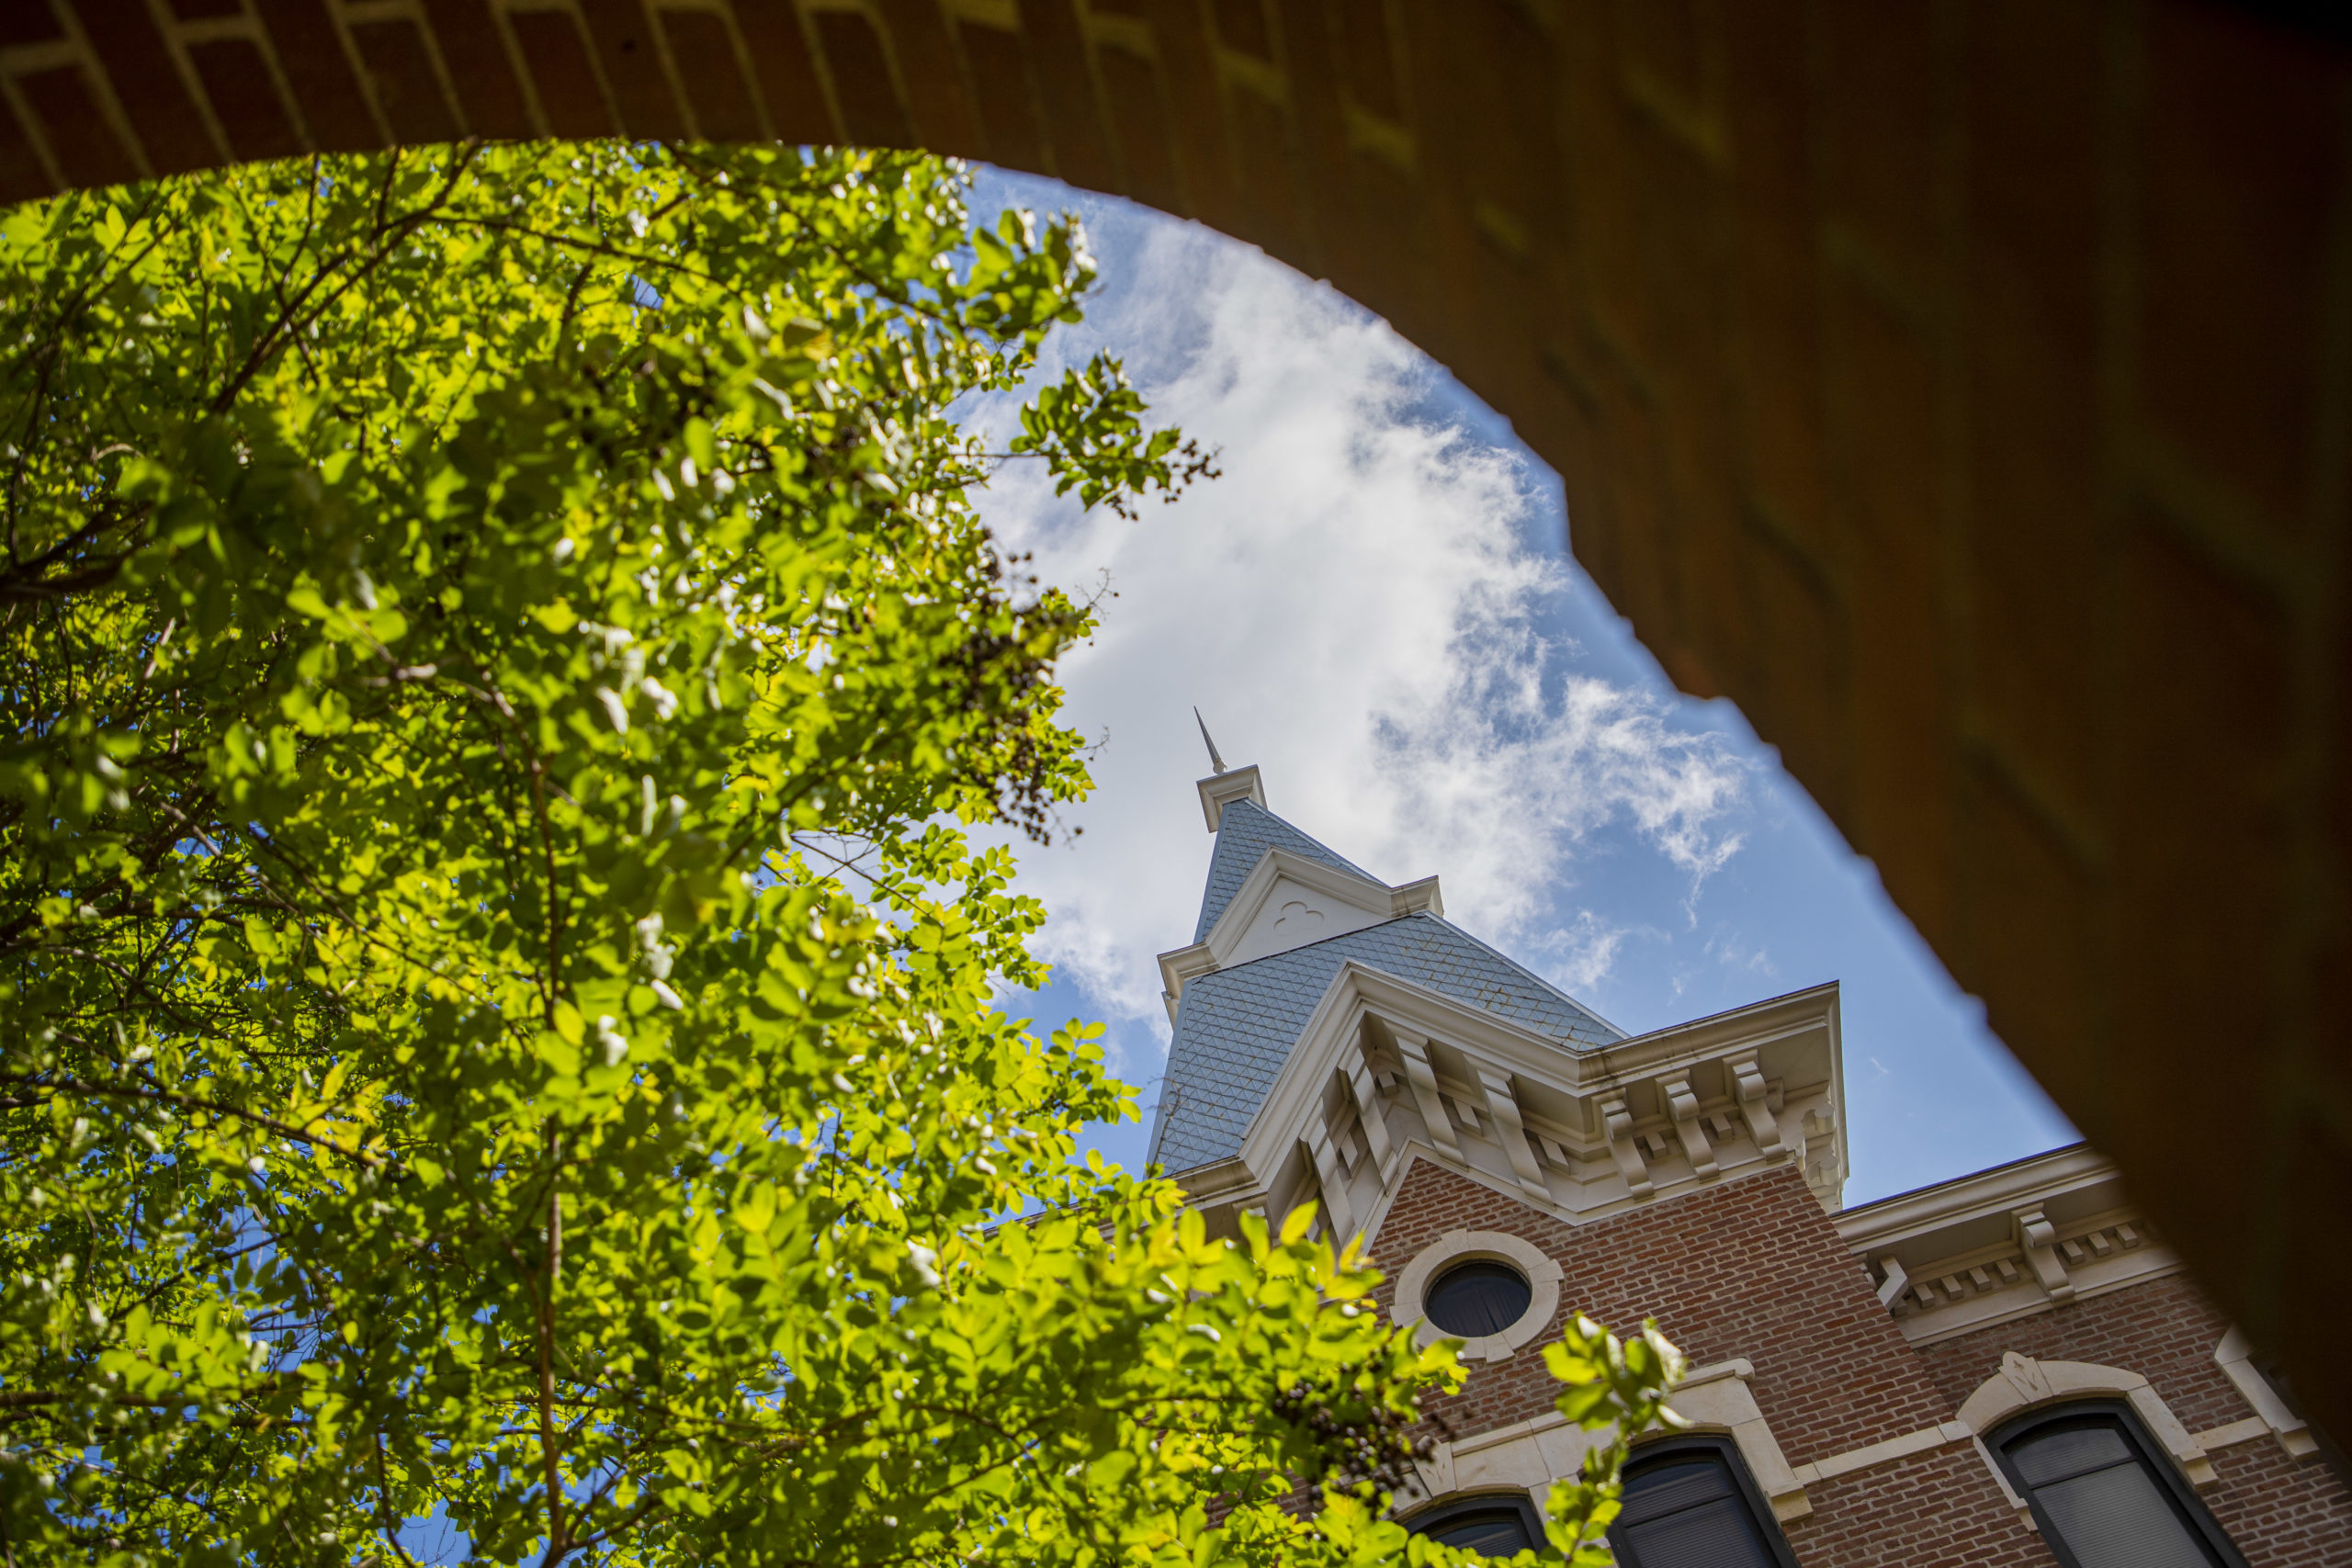 An Old Main spire, viewed through a Burleson Quad archway